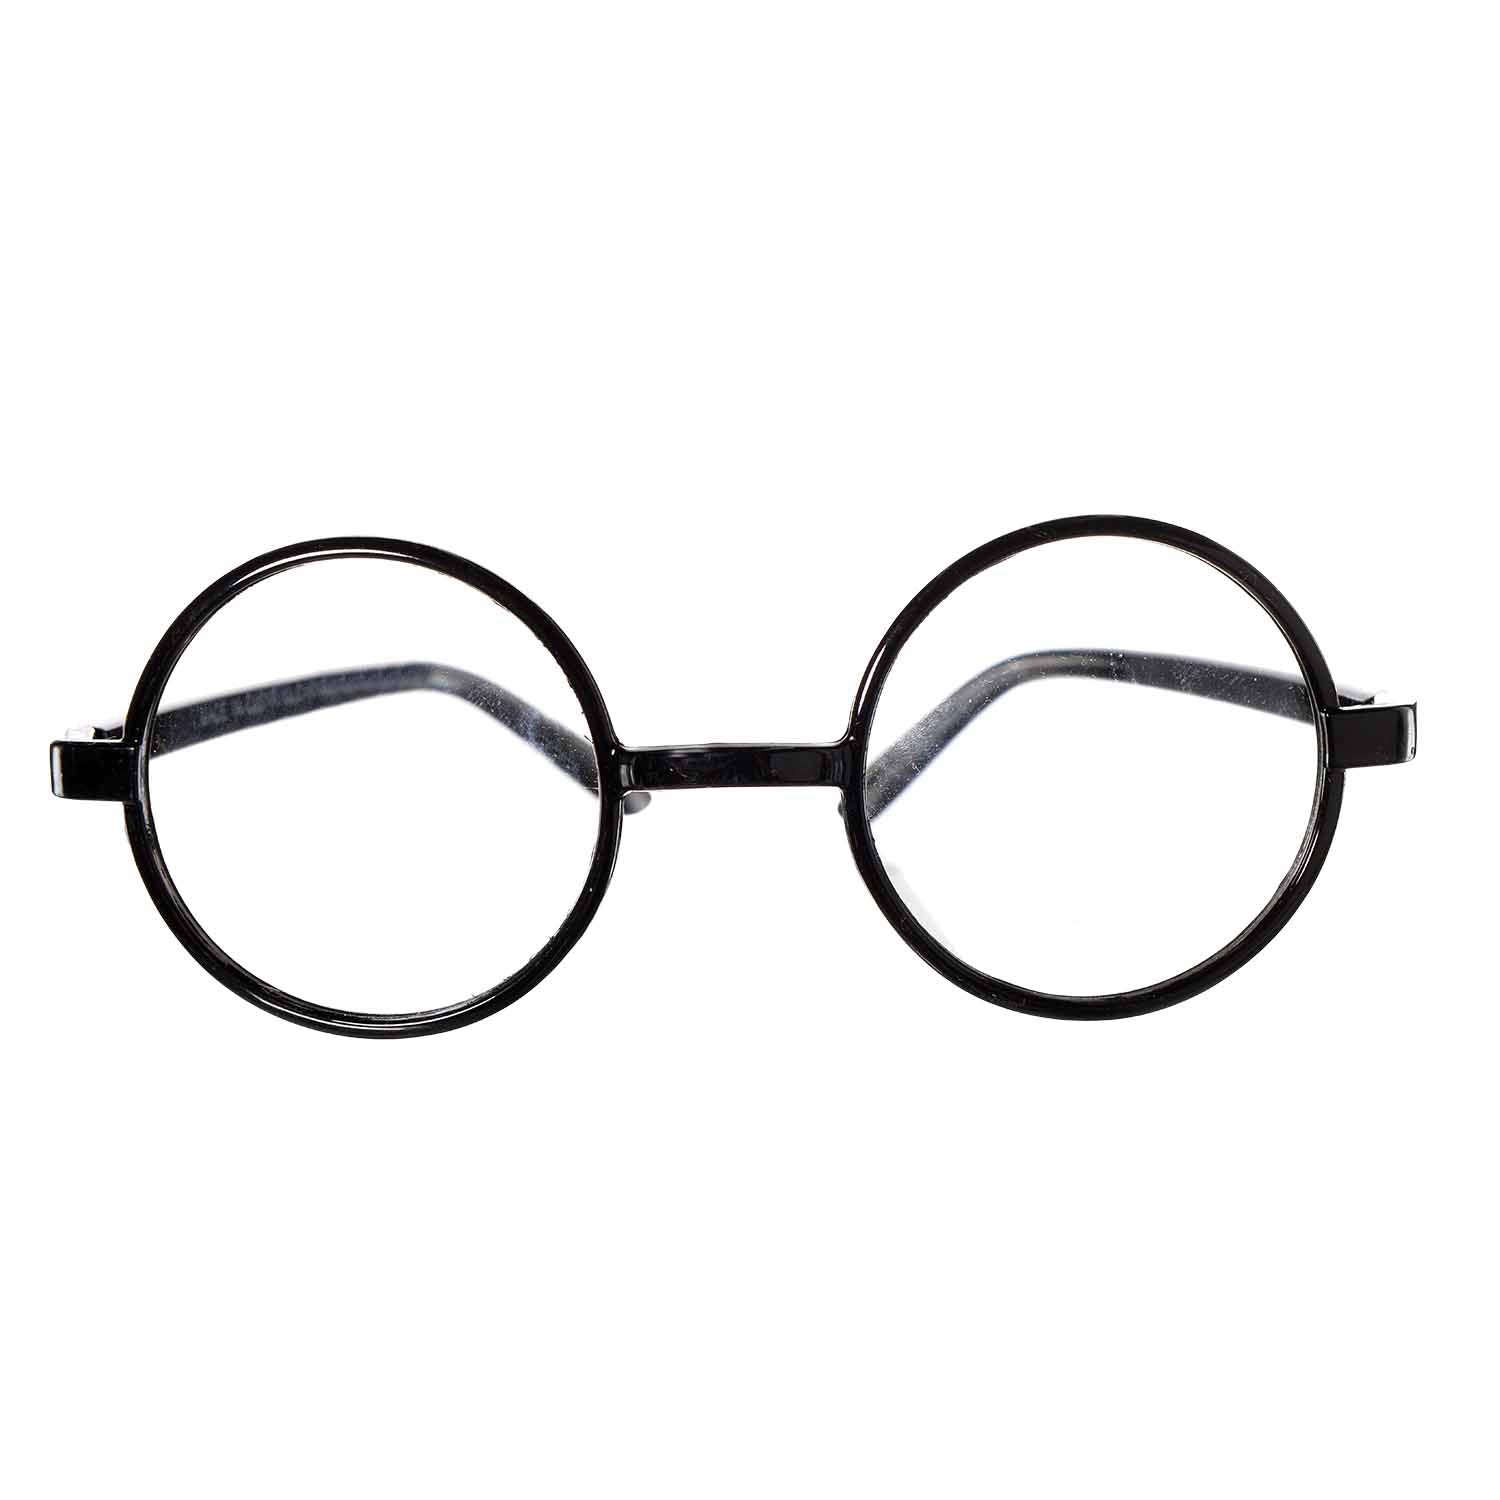 Harry Potter Glasses One size